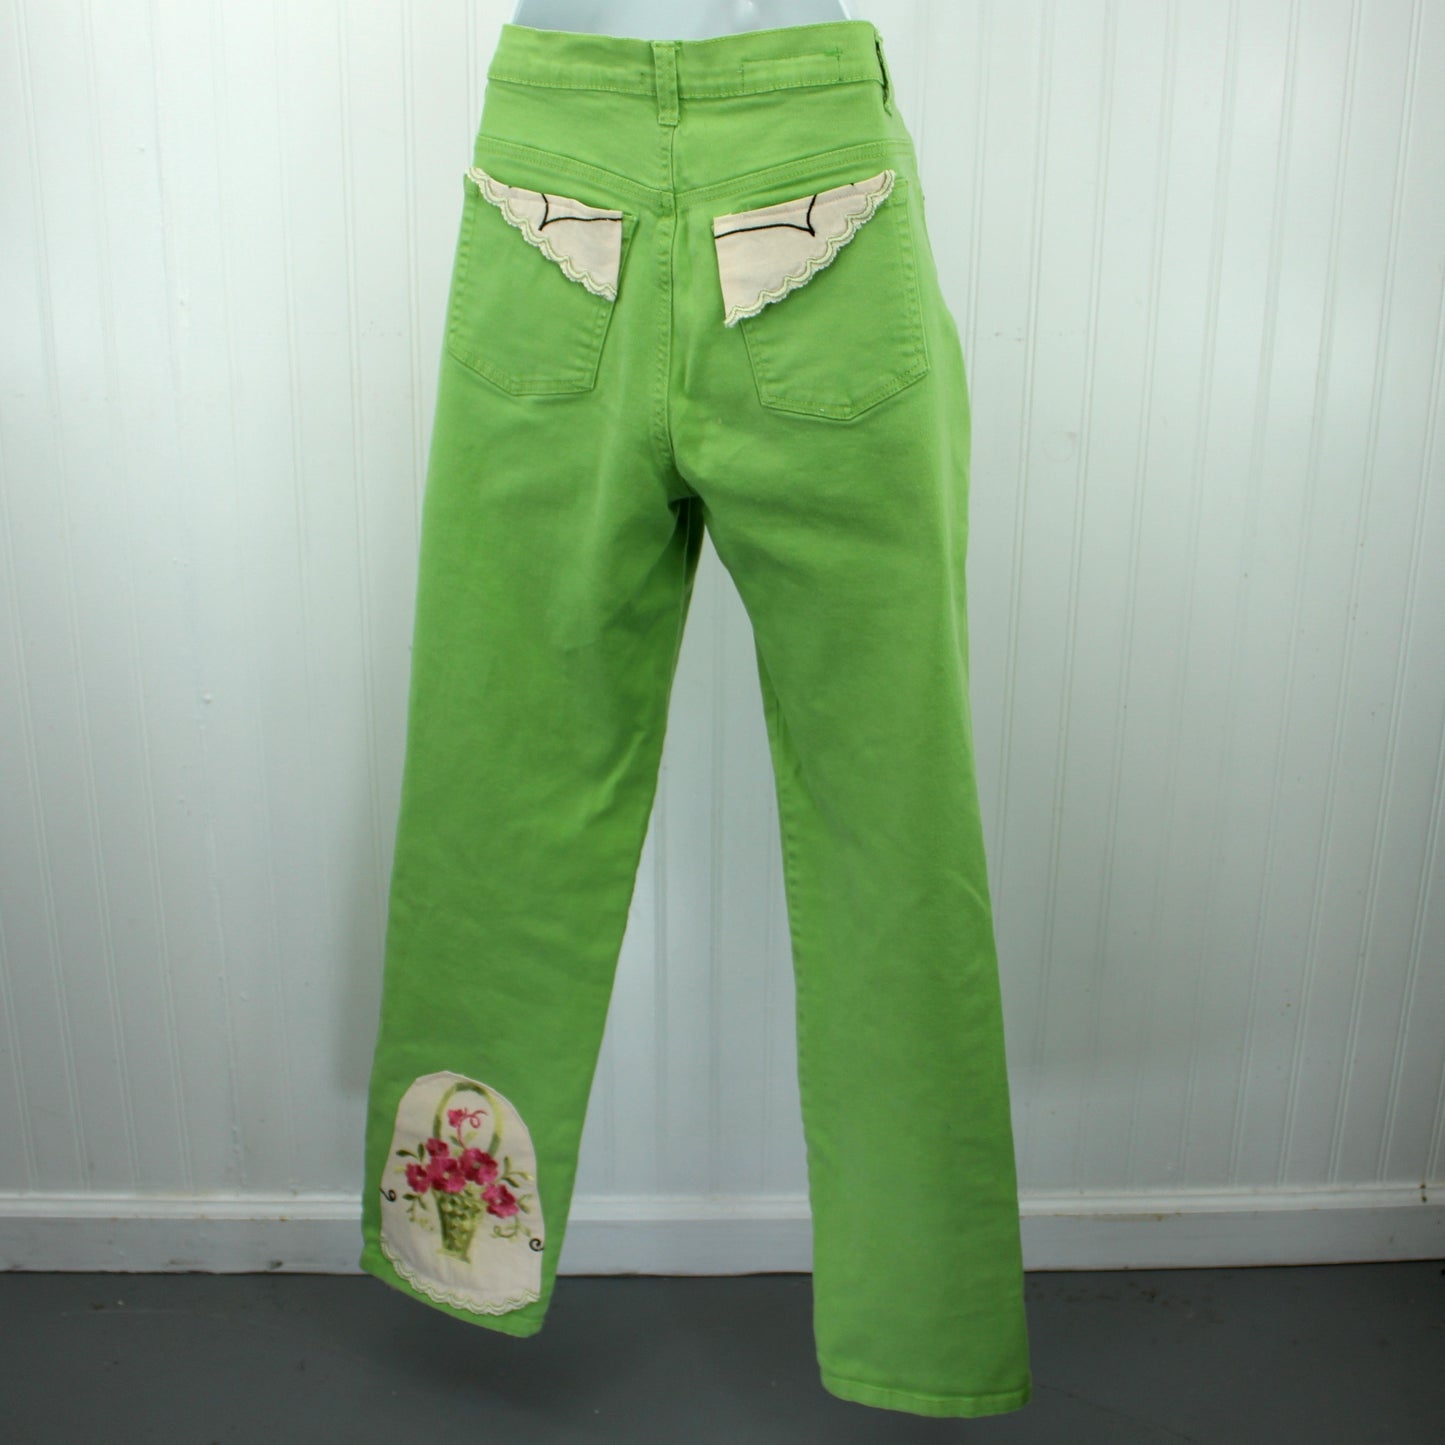 Gloria Vanderbilt Chartreuse Green Jeans Patzi Design Embroidery Flower Size 8 back full view of jeans